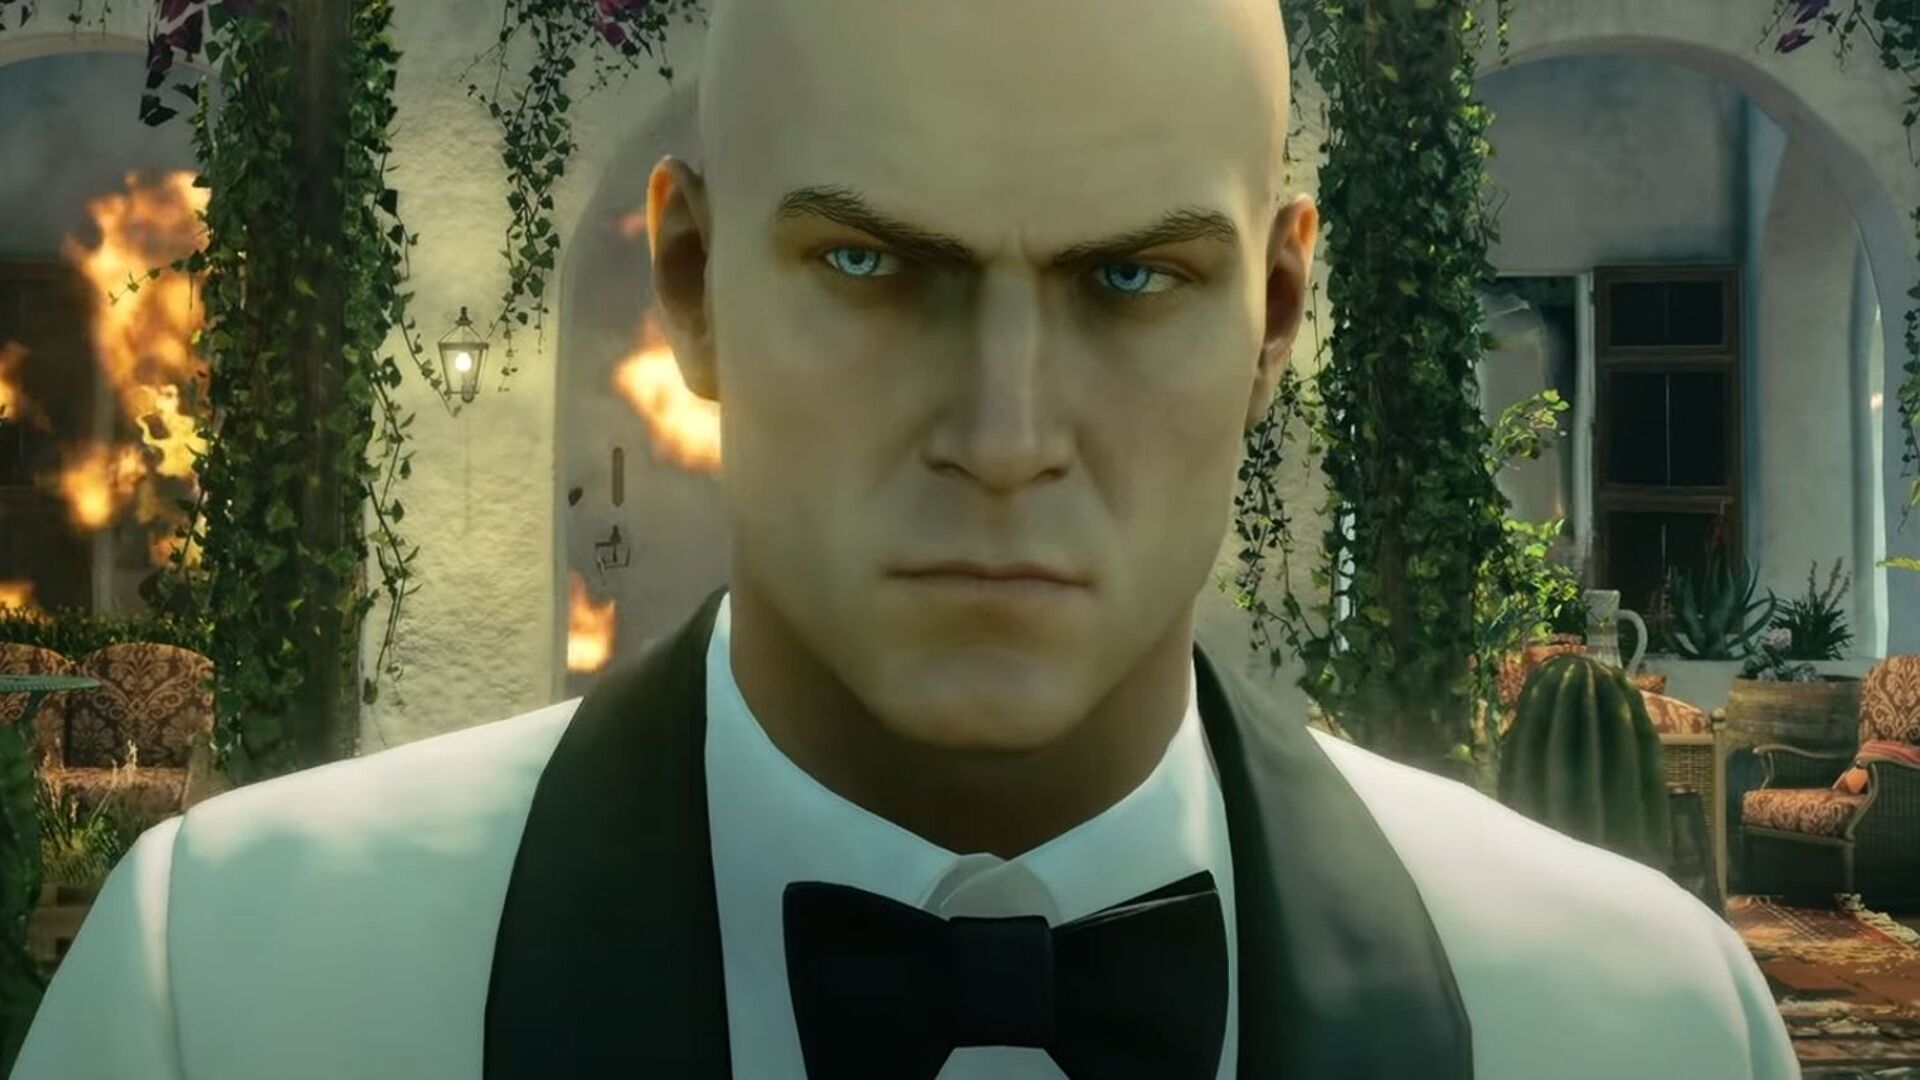 Hitman 3 goes fairy tale with November’s Three Little Pigs escalation contract